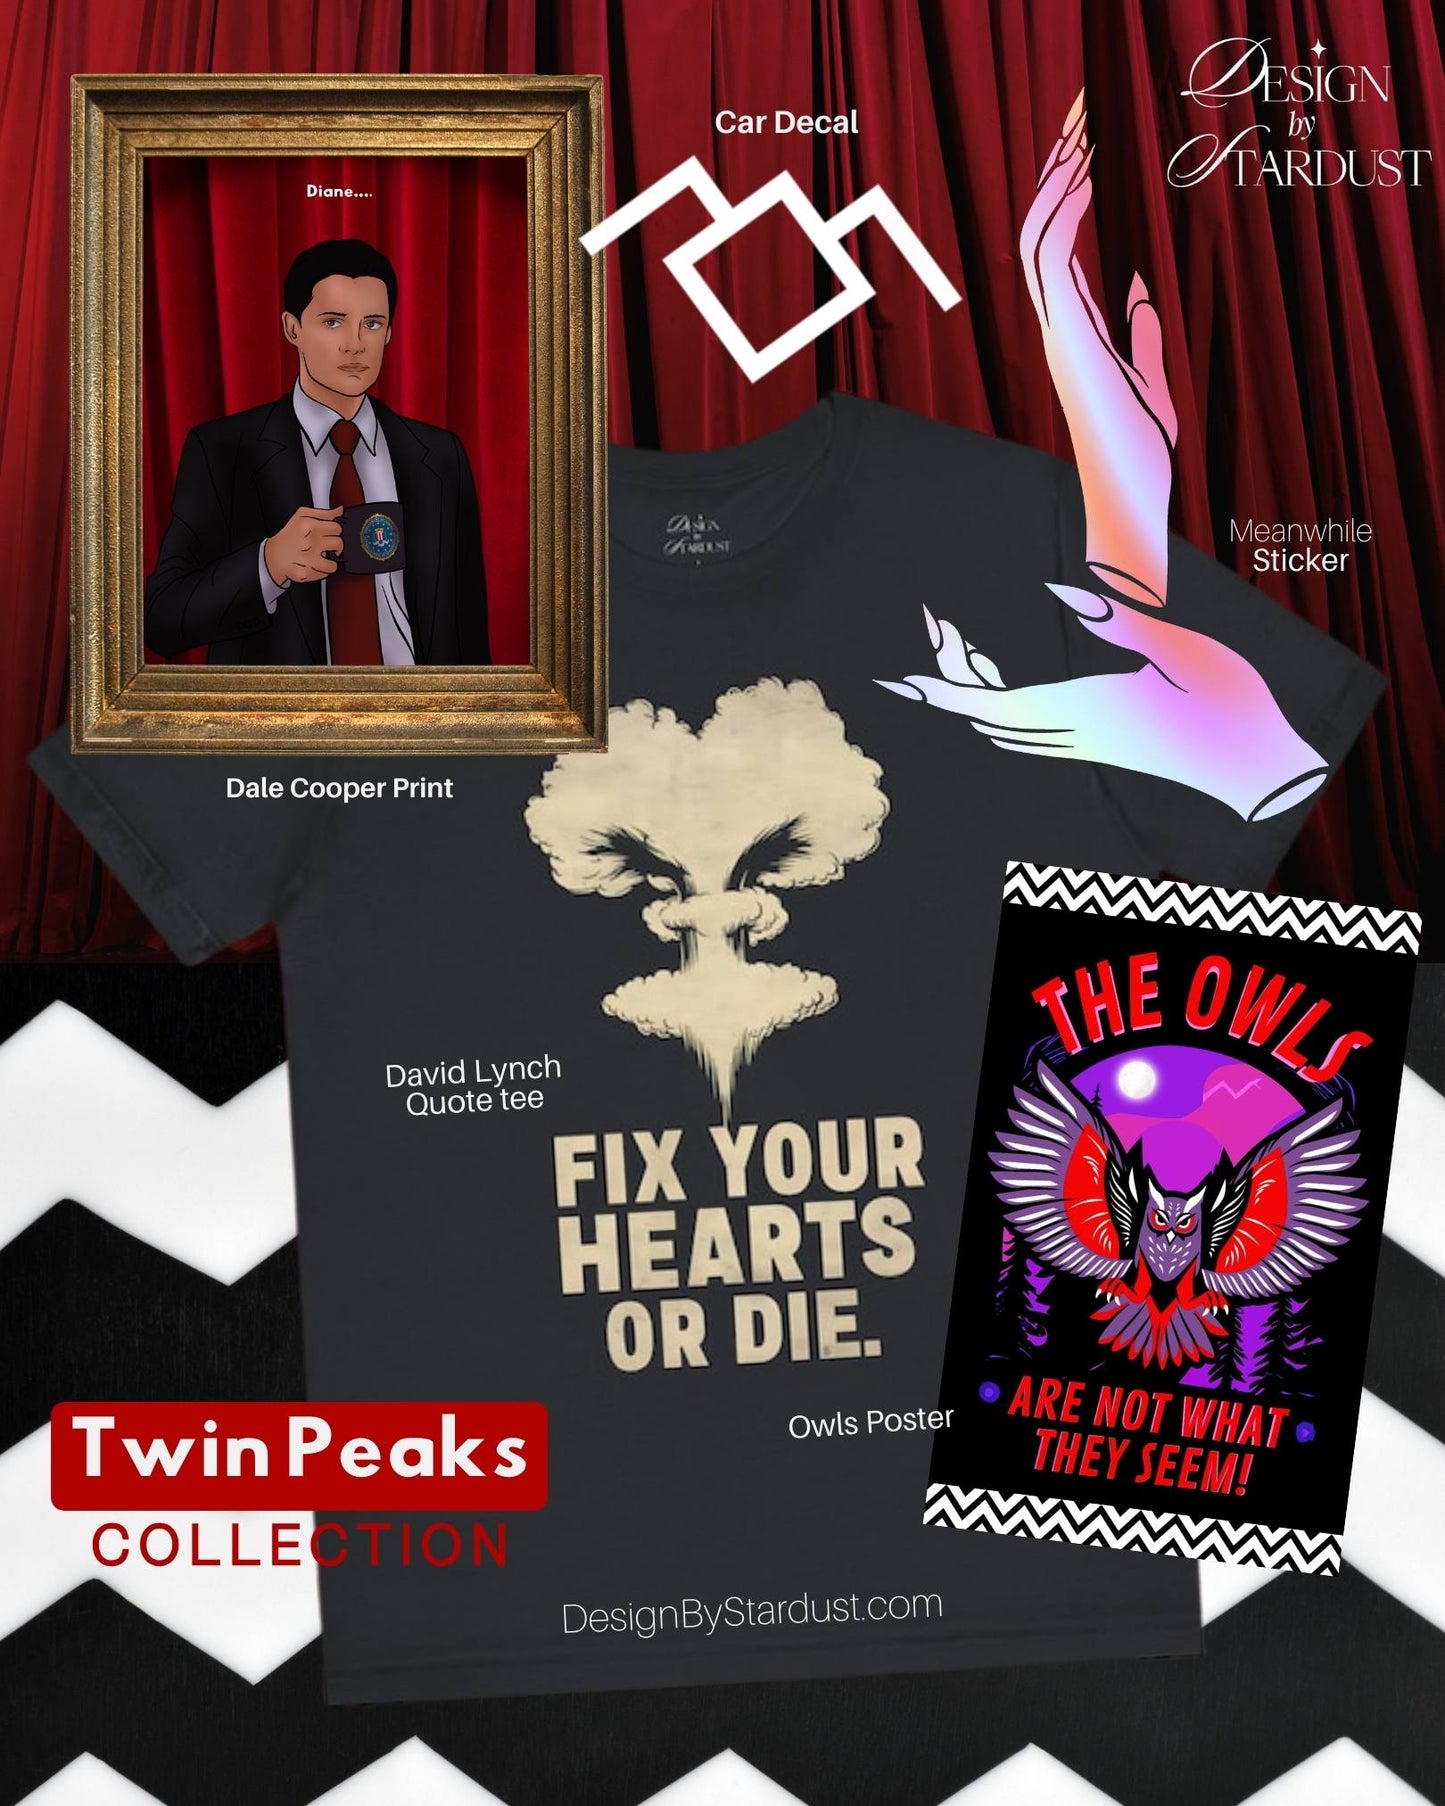 Meanwhile Laura Palmer Hands Twin Peaks Car Decal